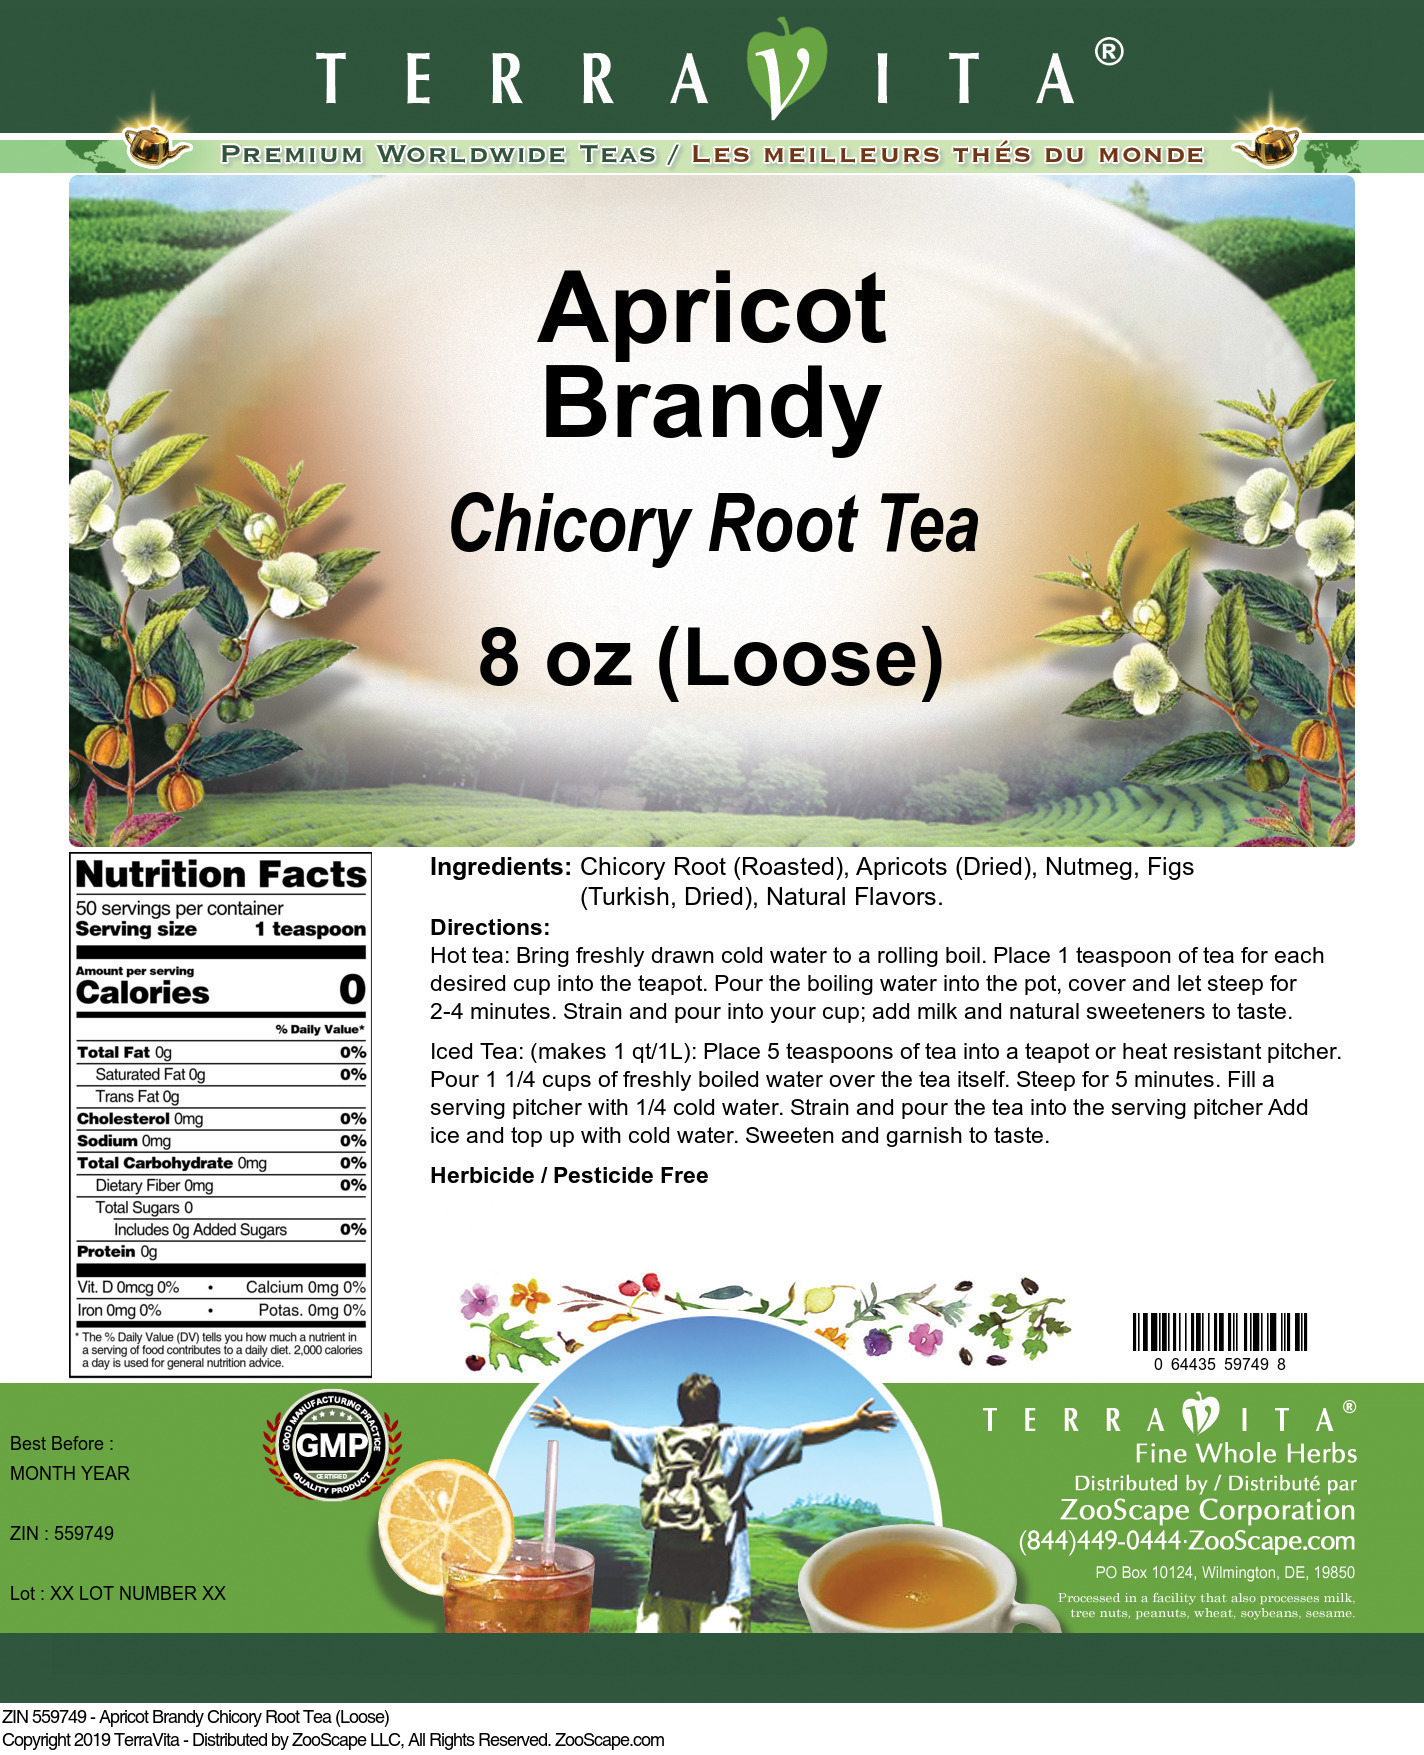 Apricot Brandy Chicory Root Tea (Loose) - Label